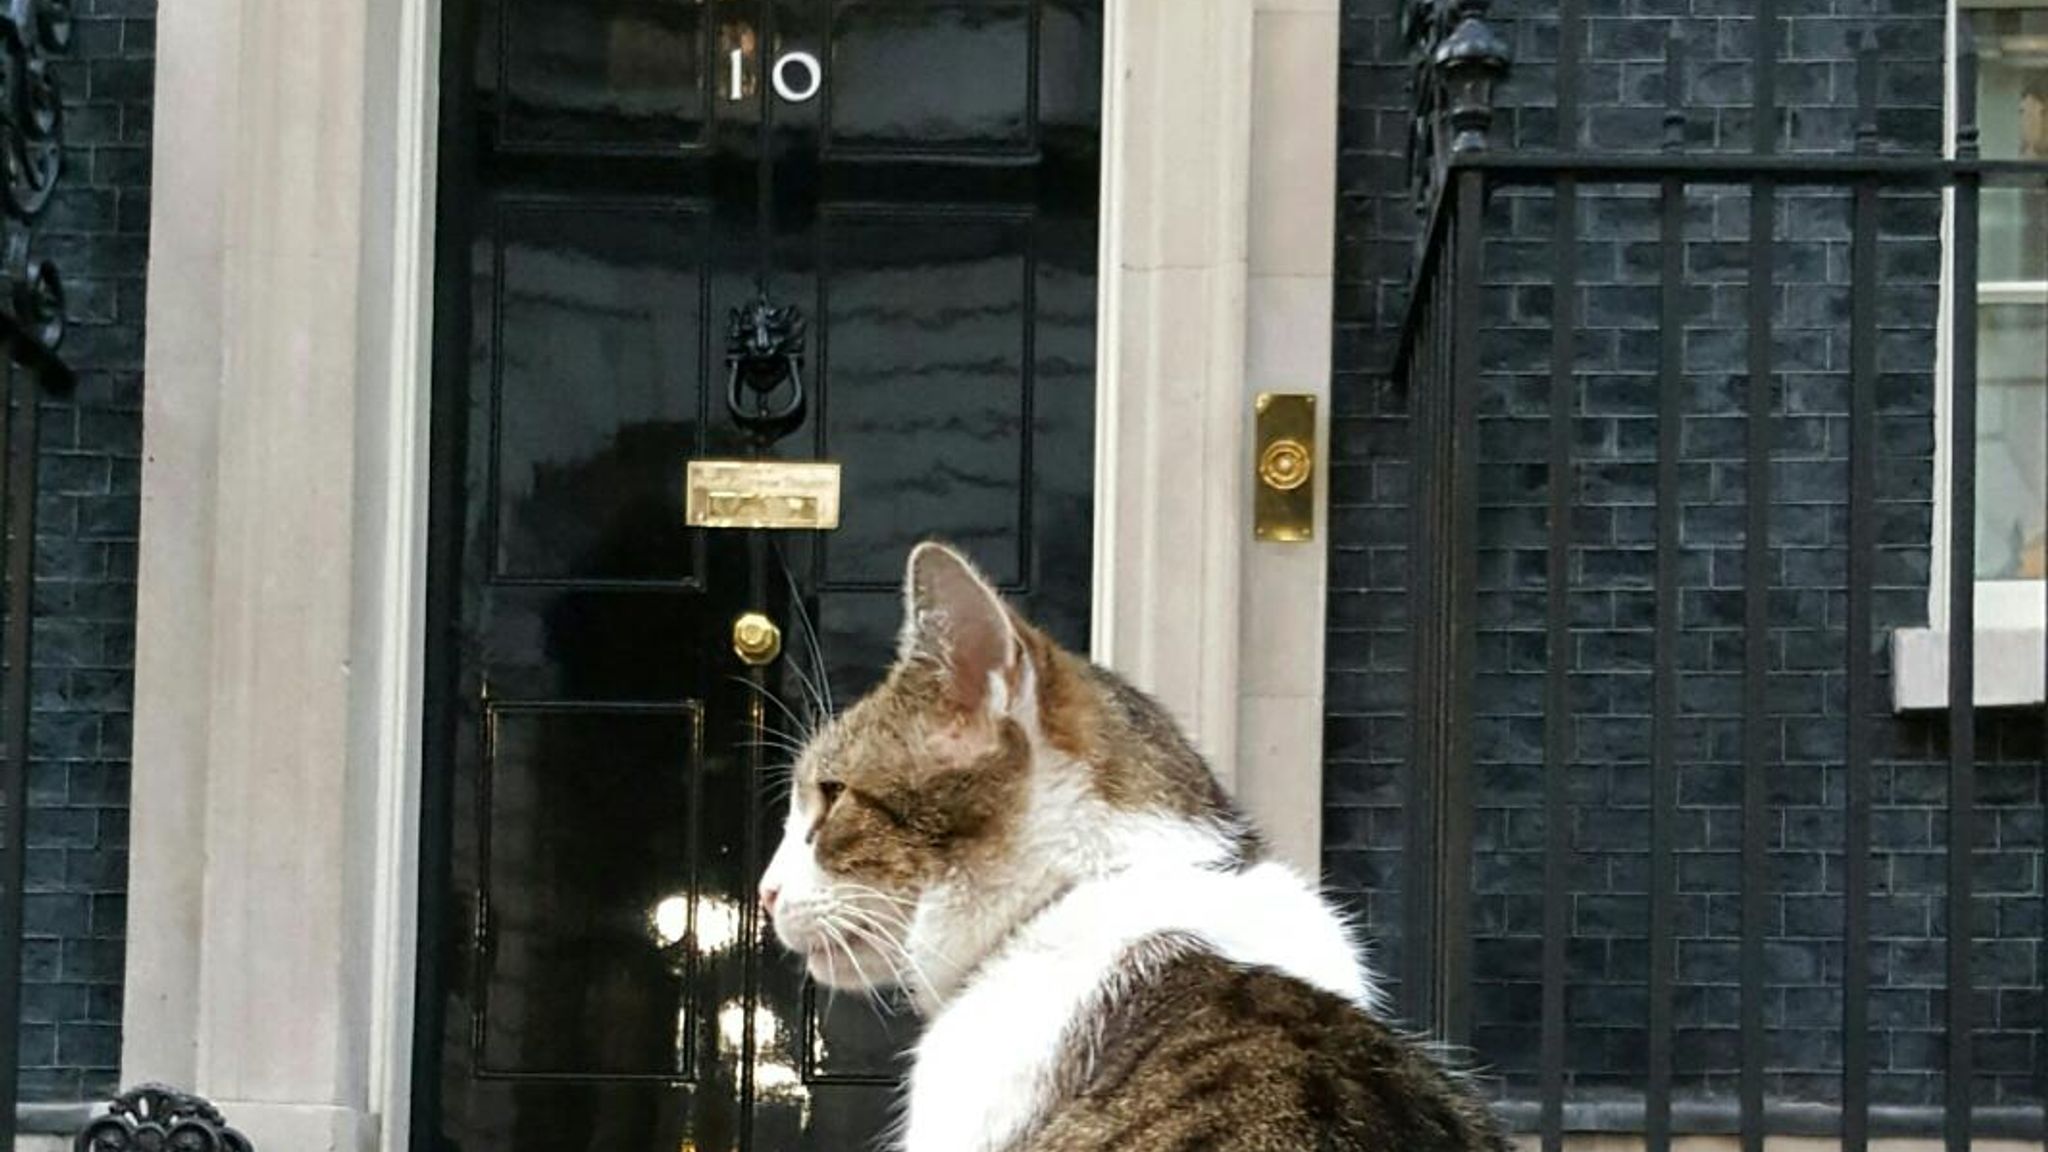 Larry The Cat Celebrates 10 Years At 10 Downing Street Uk News Sky News